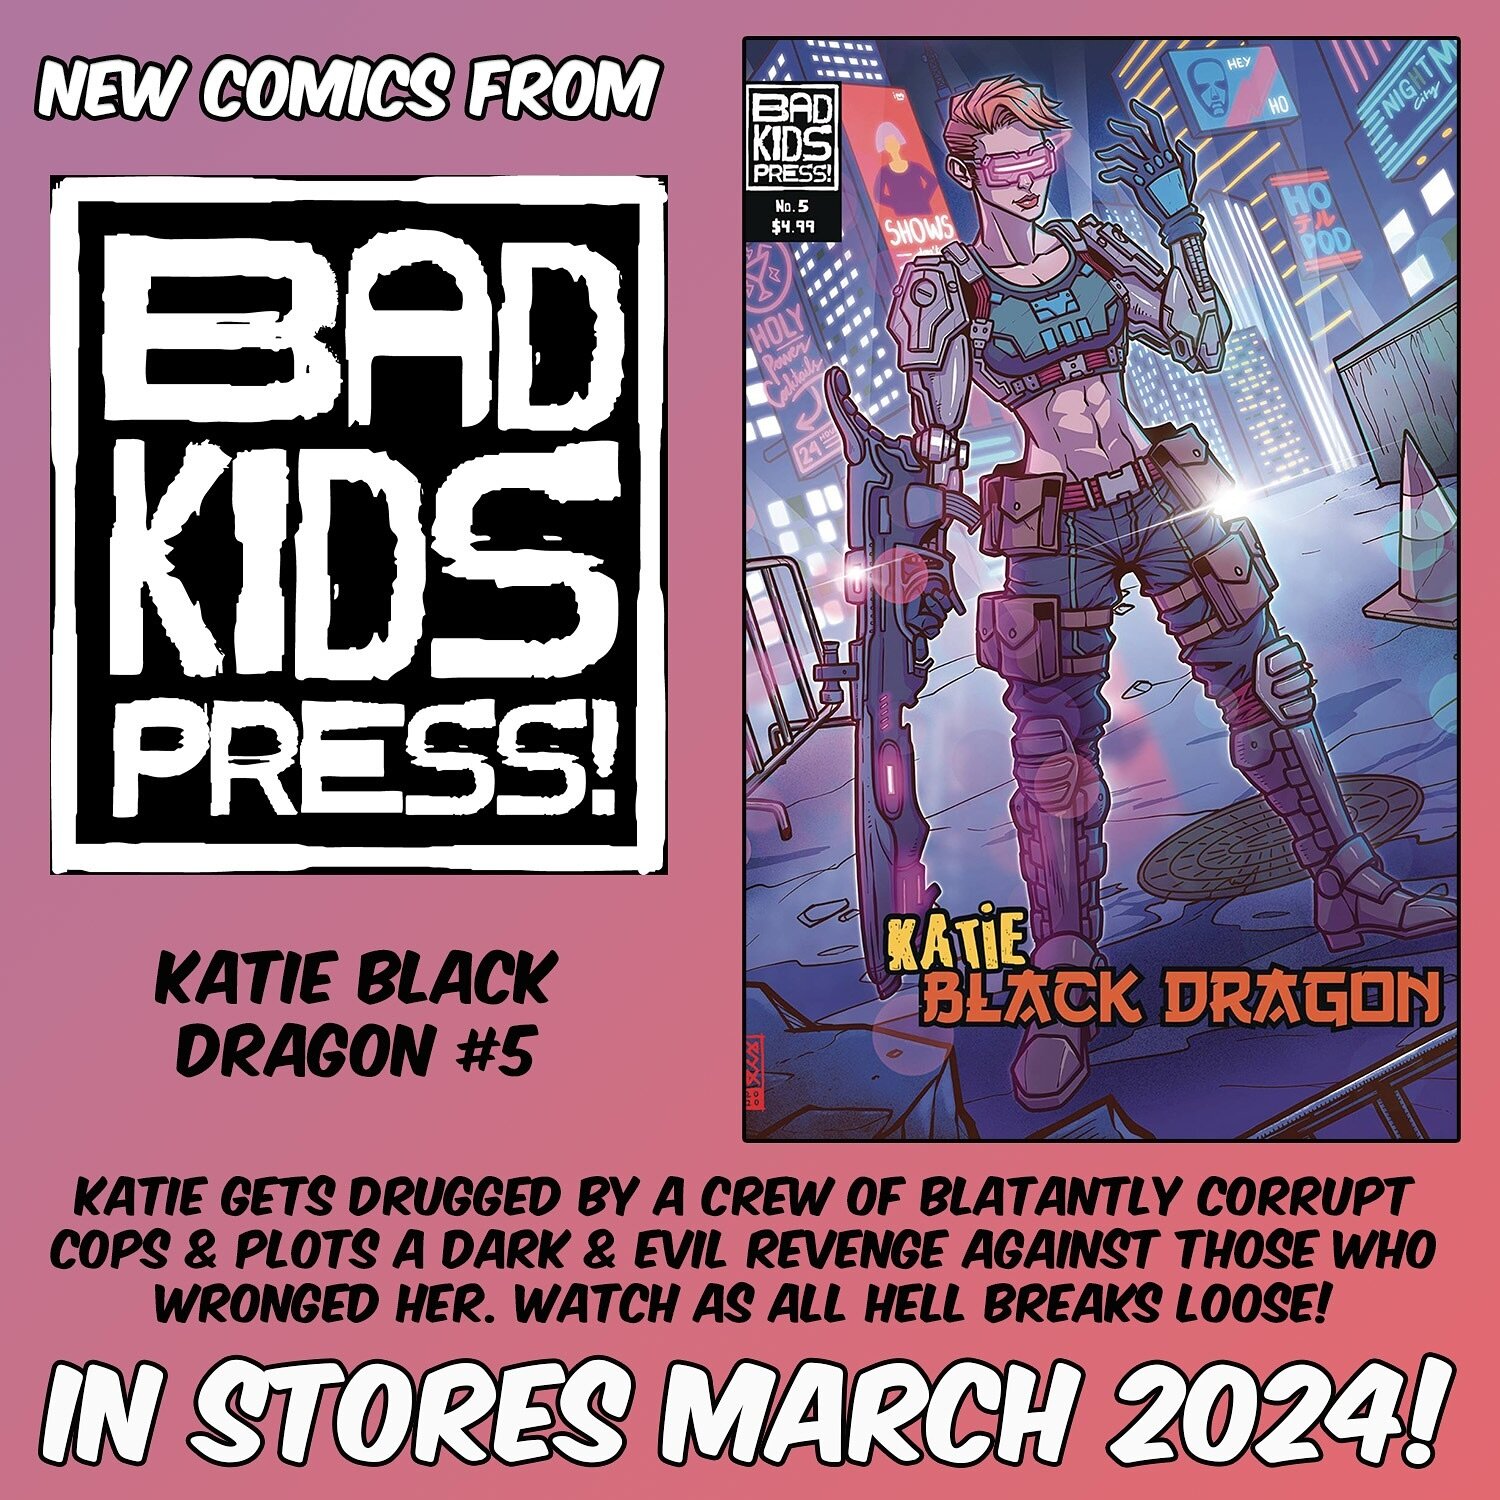 This week a new KATIE BLACK DRAGON karate kicks into your LCS &amp; leaves you bleeding &amp; broken &mdash; but only if you get on her bad side! See what happens when Katie wreaks revenge on the dudes who did her dirty!